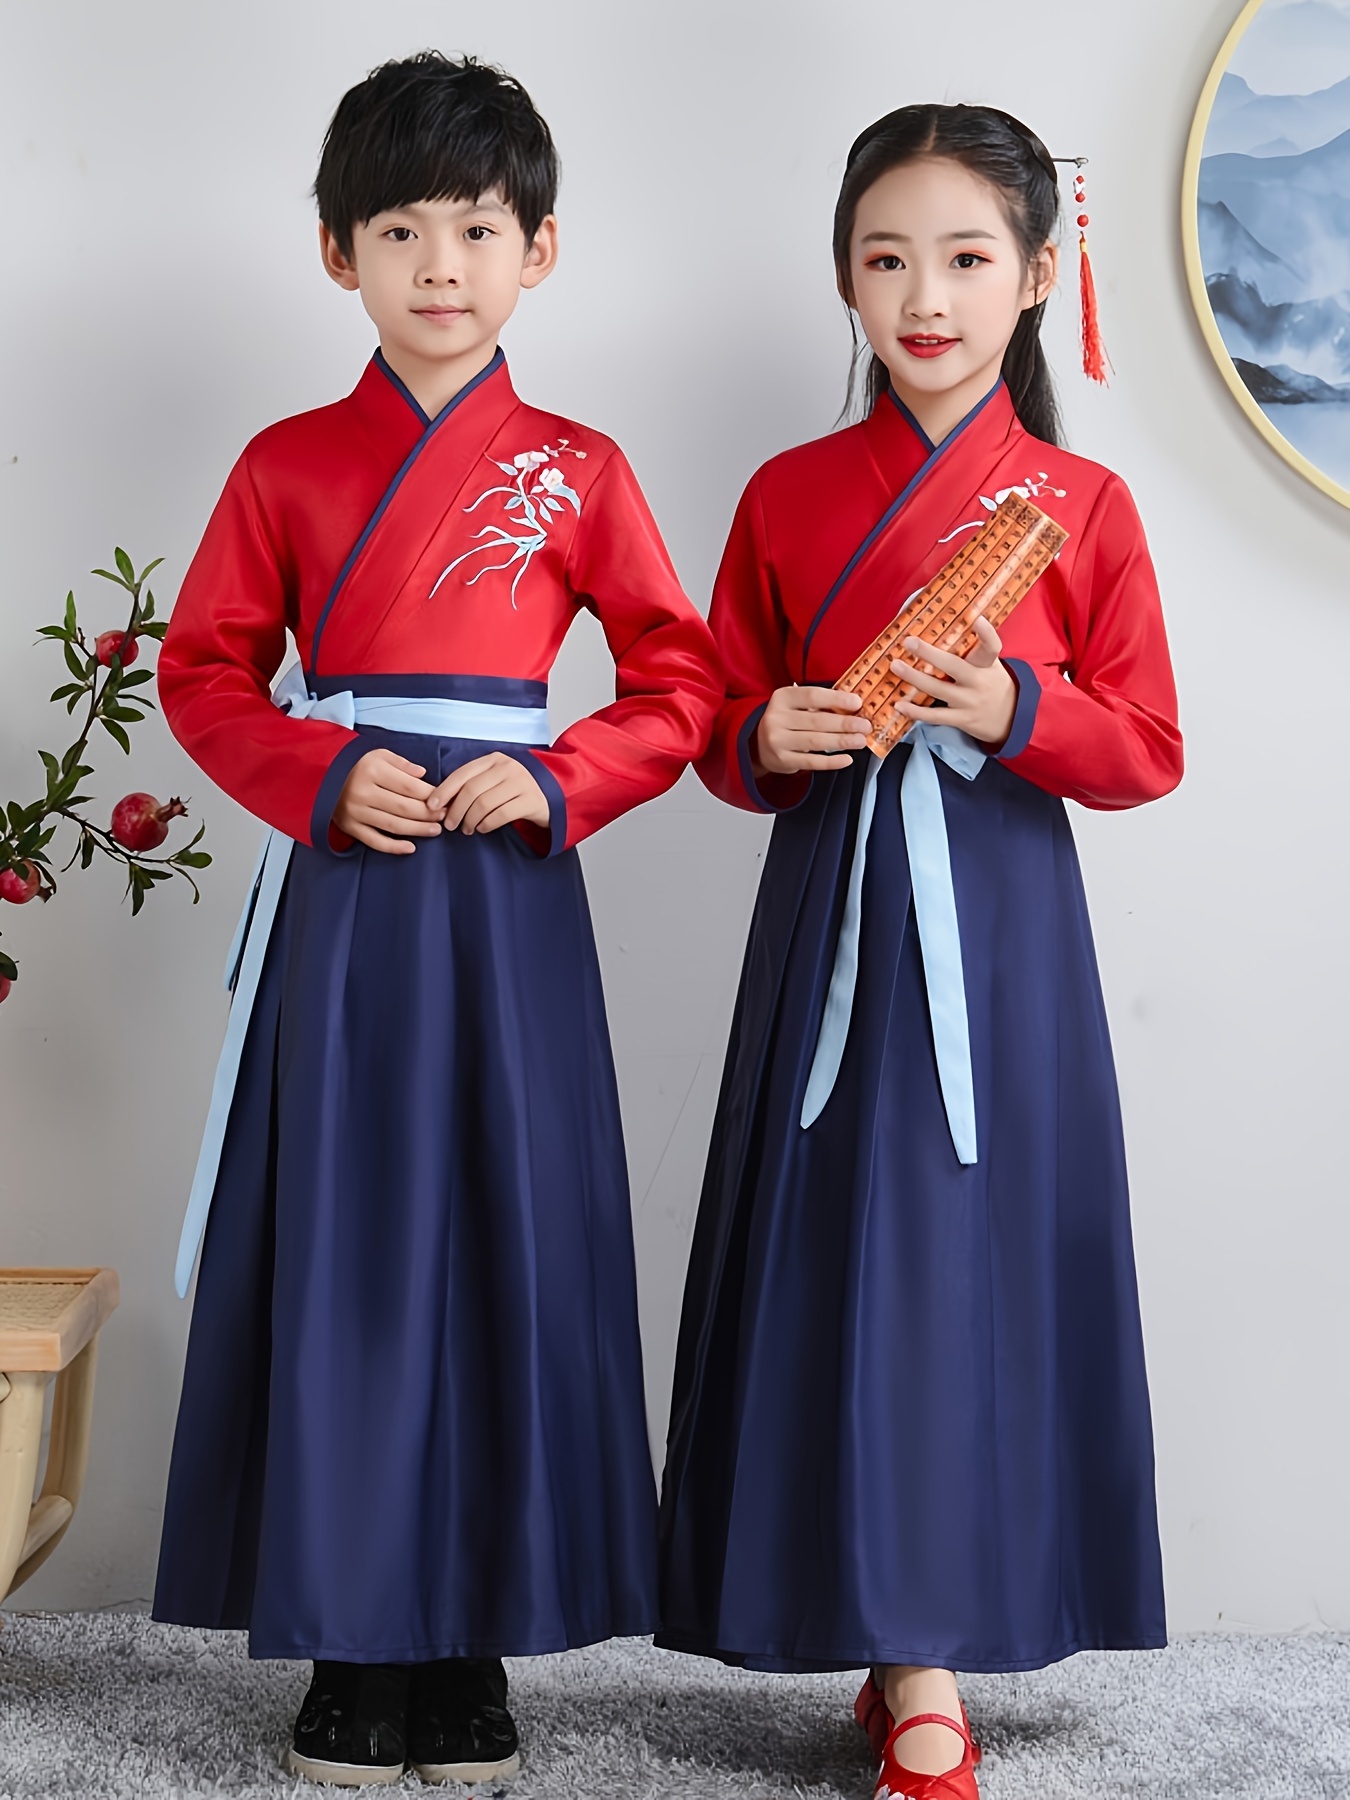 boys and girls chinese ancient traditional embroidery clothing long sleeve folk dance hanfu stage performance dress